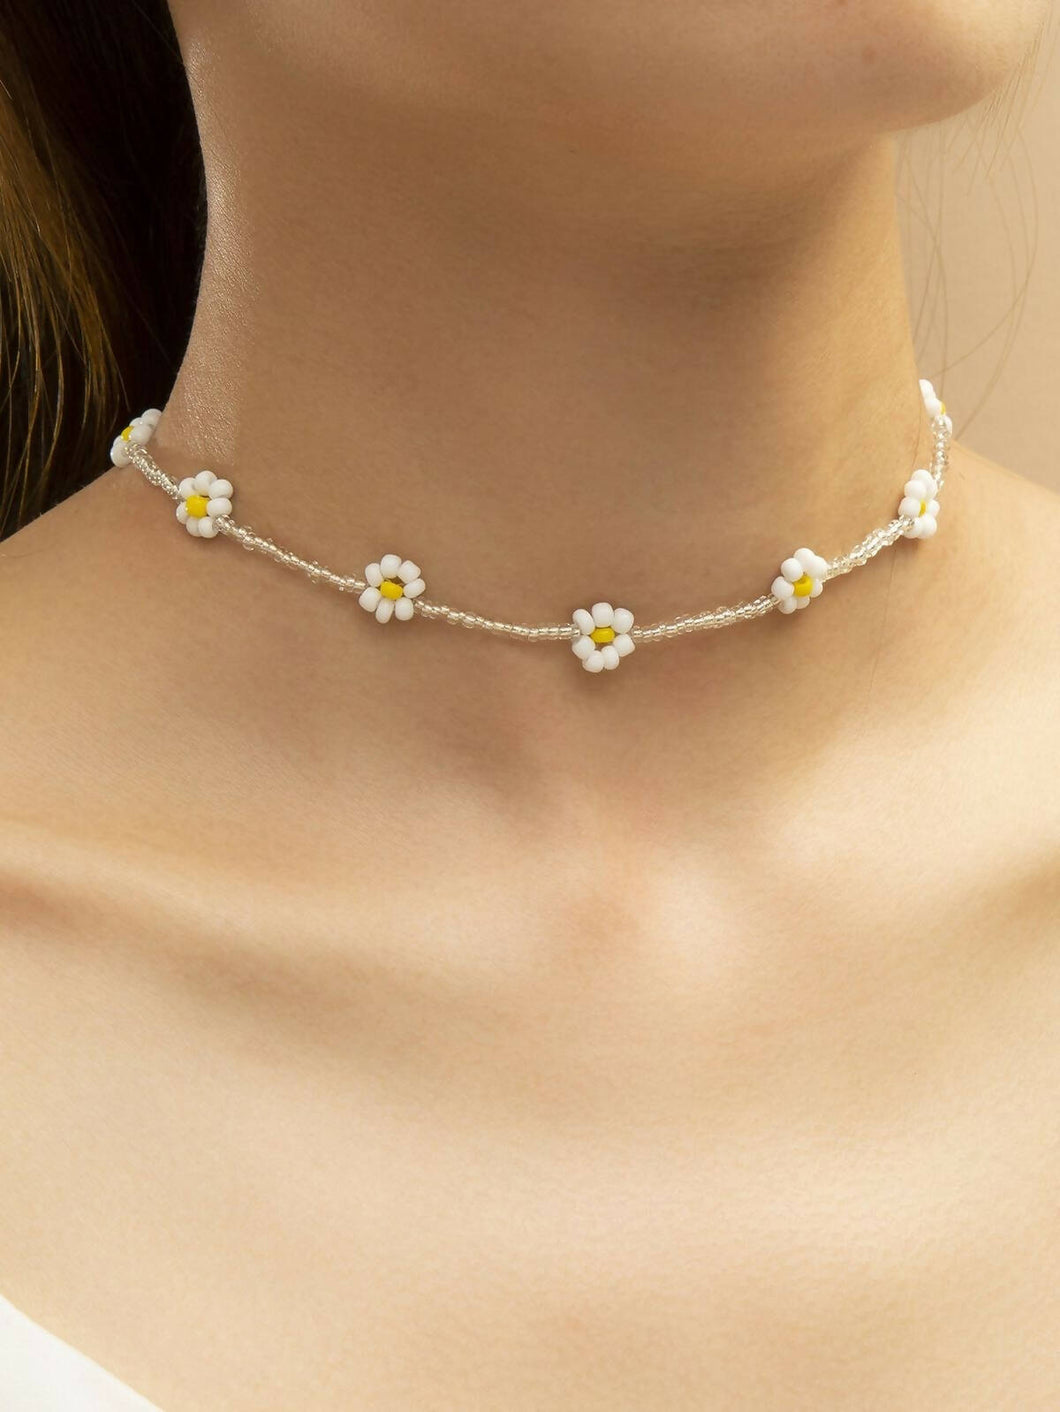 Beaded Daisy Choker Necklaces for Her